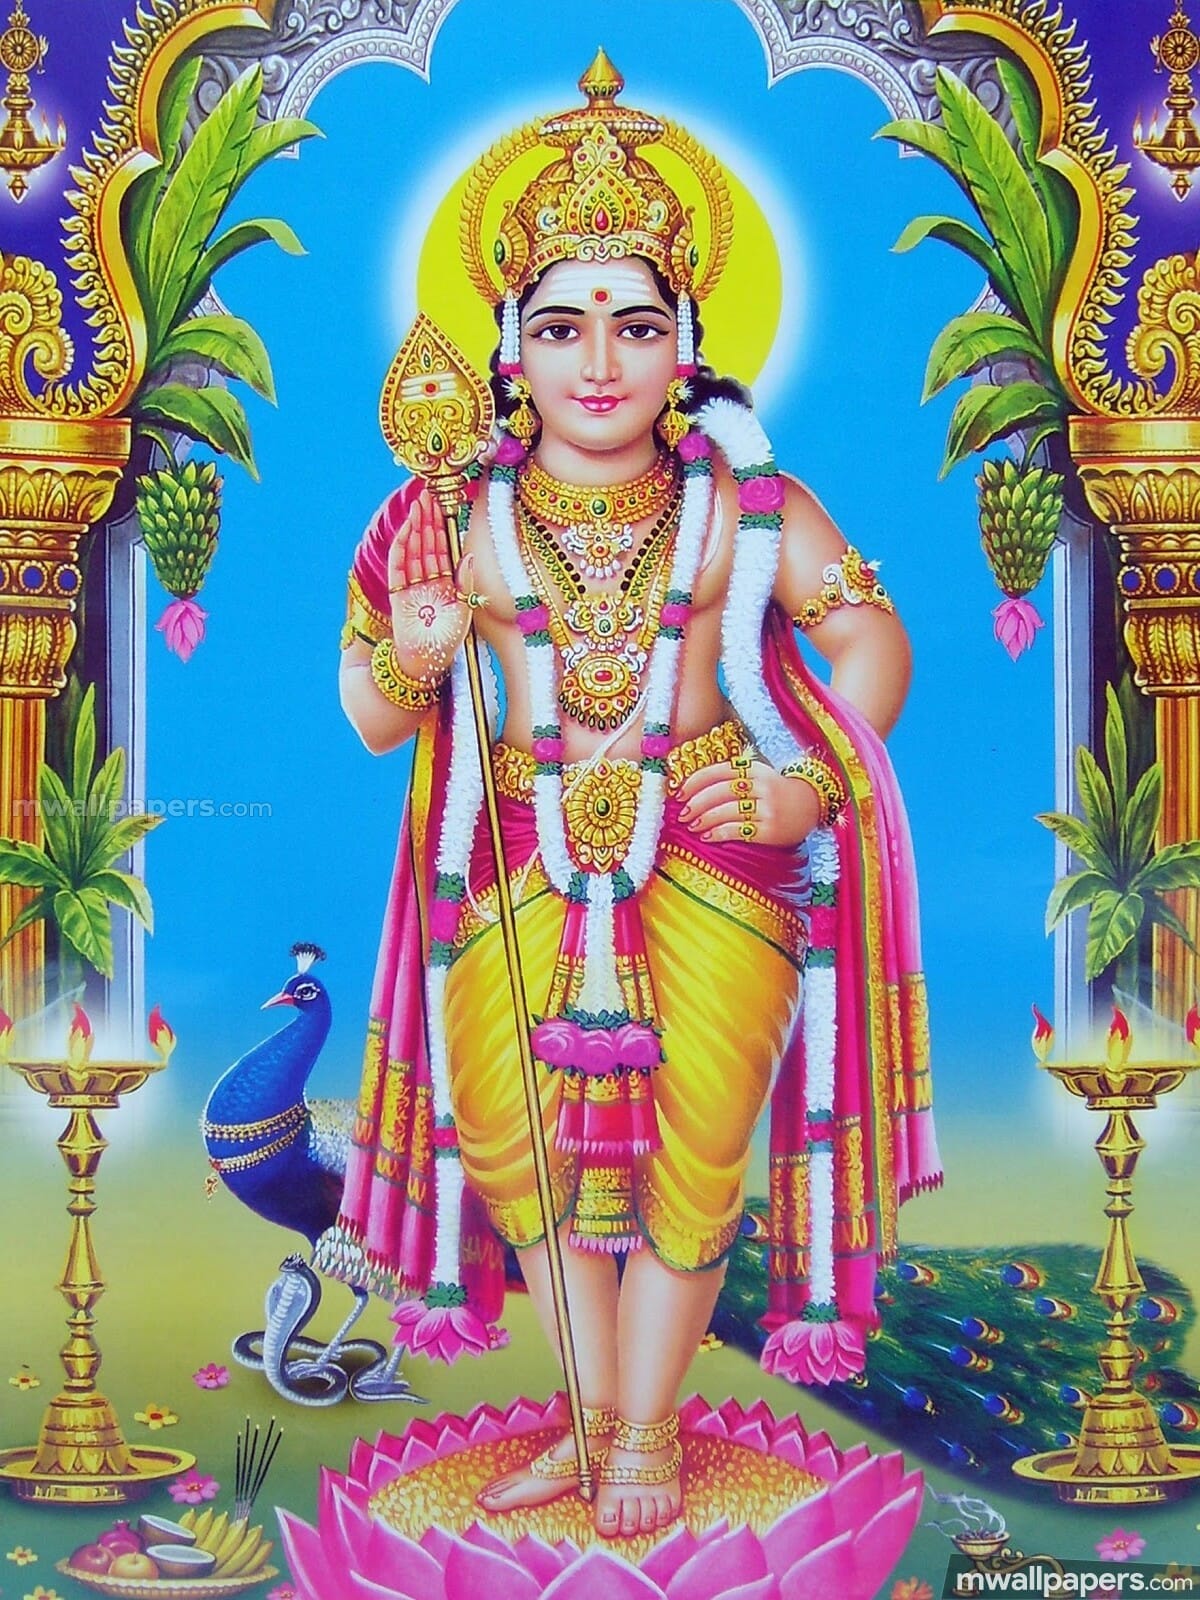 Subramanian Swamy God Wallpapers - Wallpaper Cave